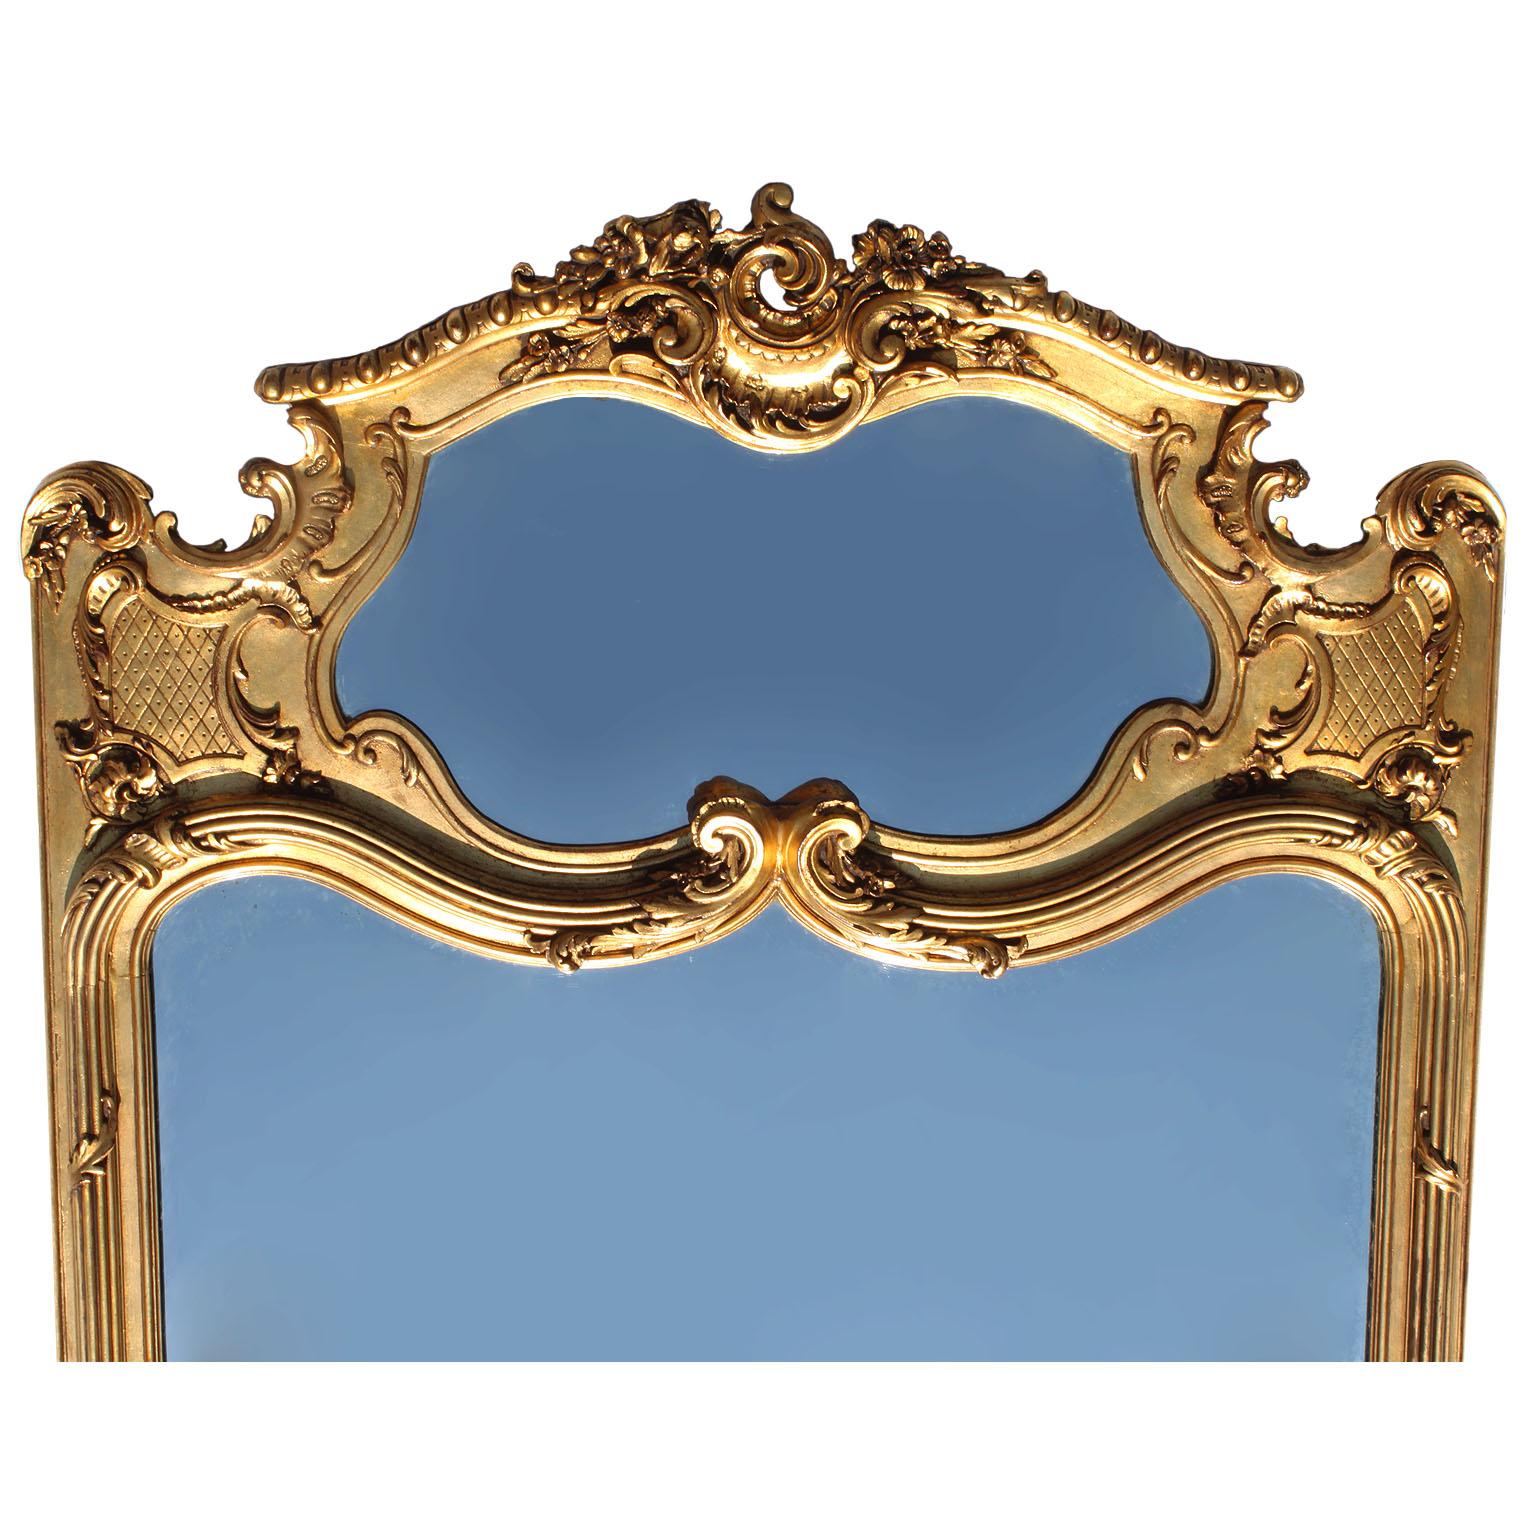 A large French 19th-20th century Belle Époque Louis XV style giltwood carved trumeau mirror frame. The elongated carved frame crowned with a scrolled finial surmounted with flowers, shells and acanthus, the top panel fitted with a mirror plate, the